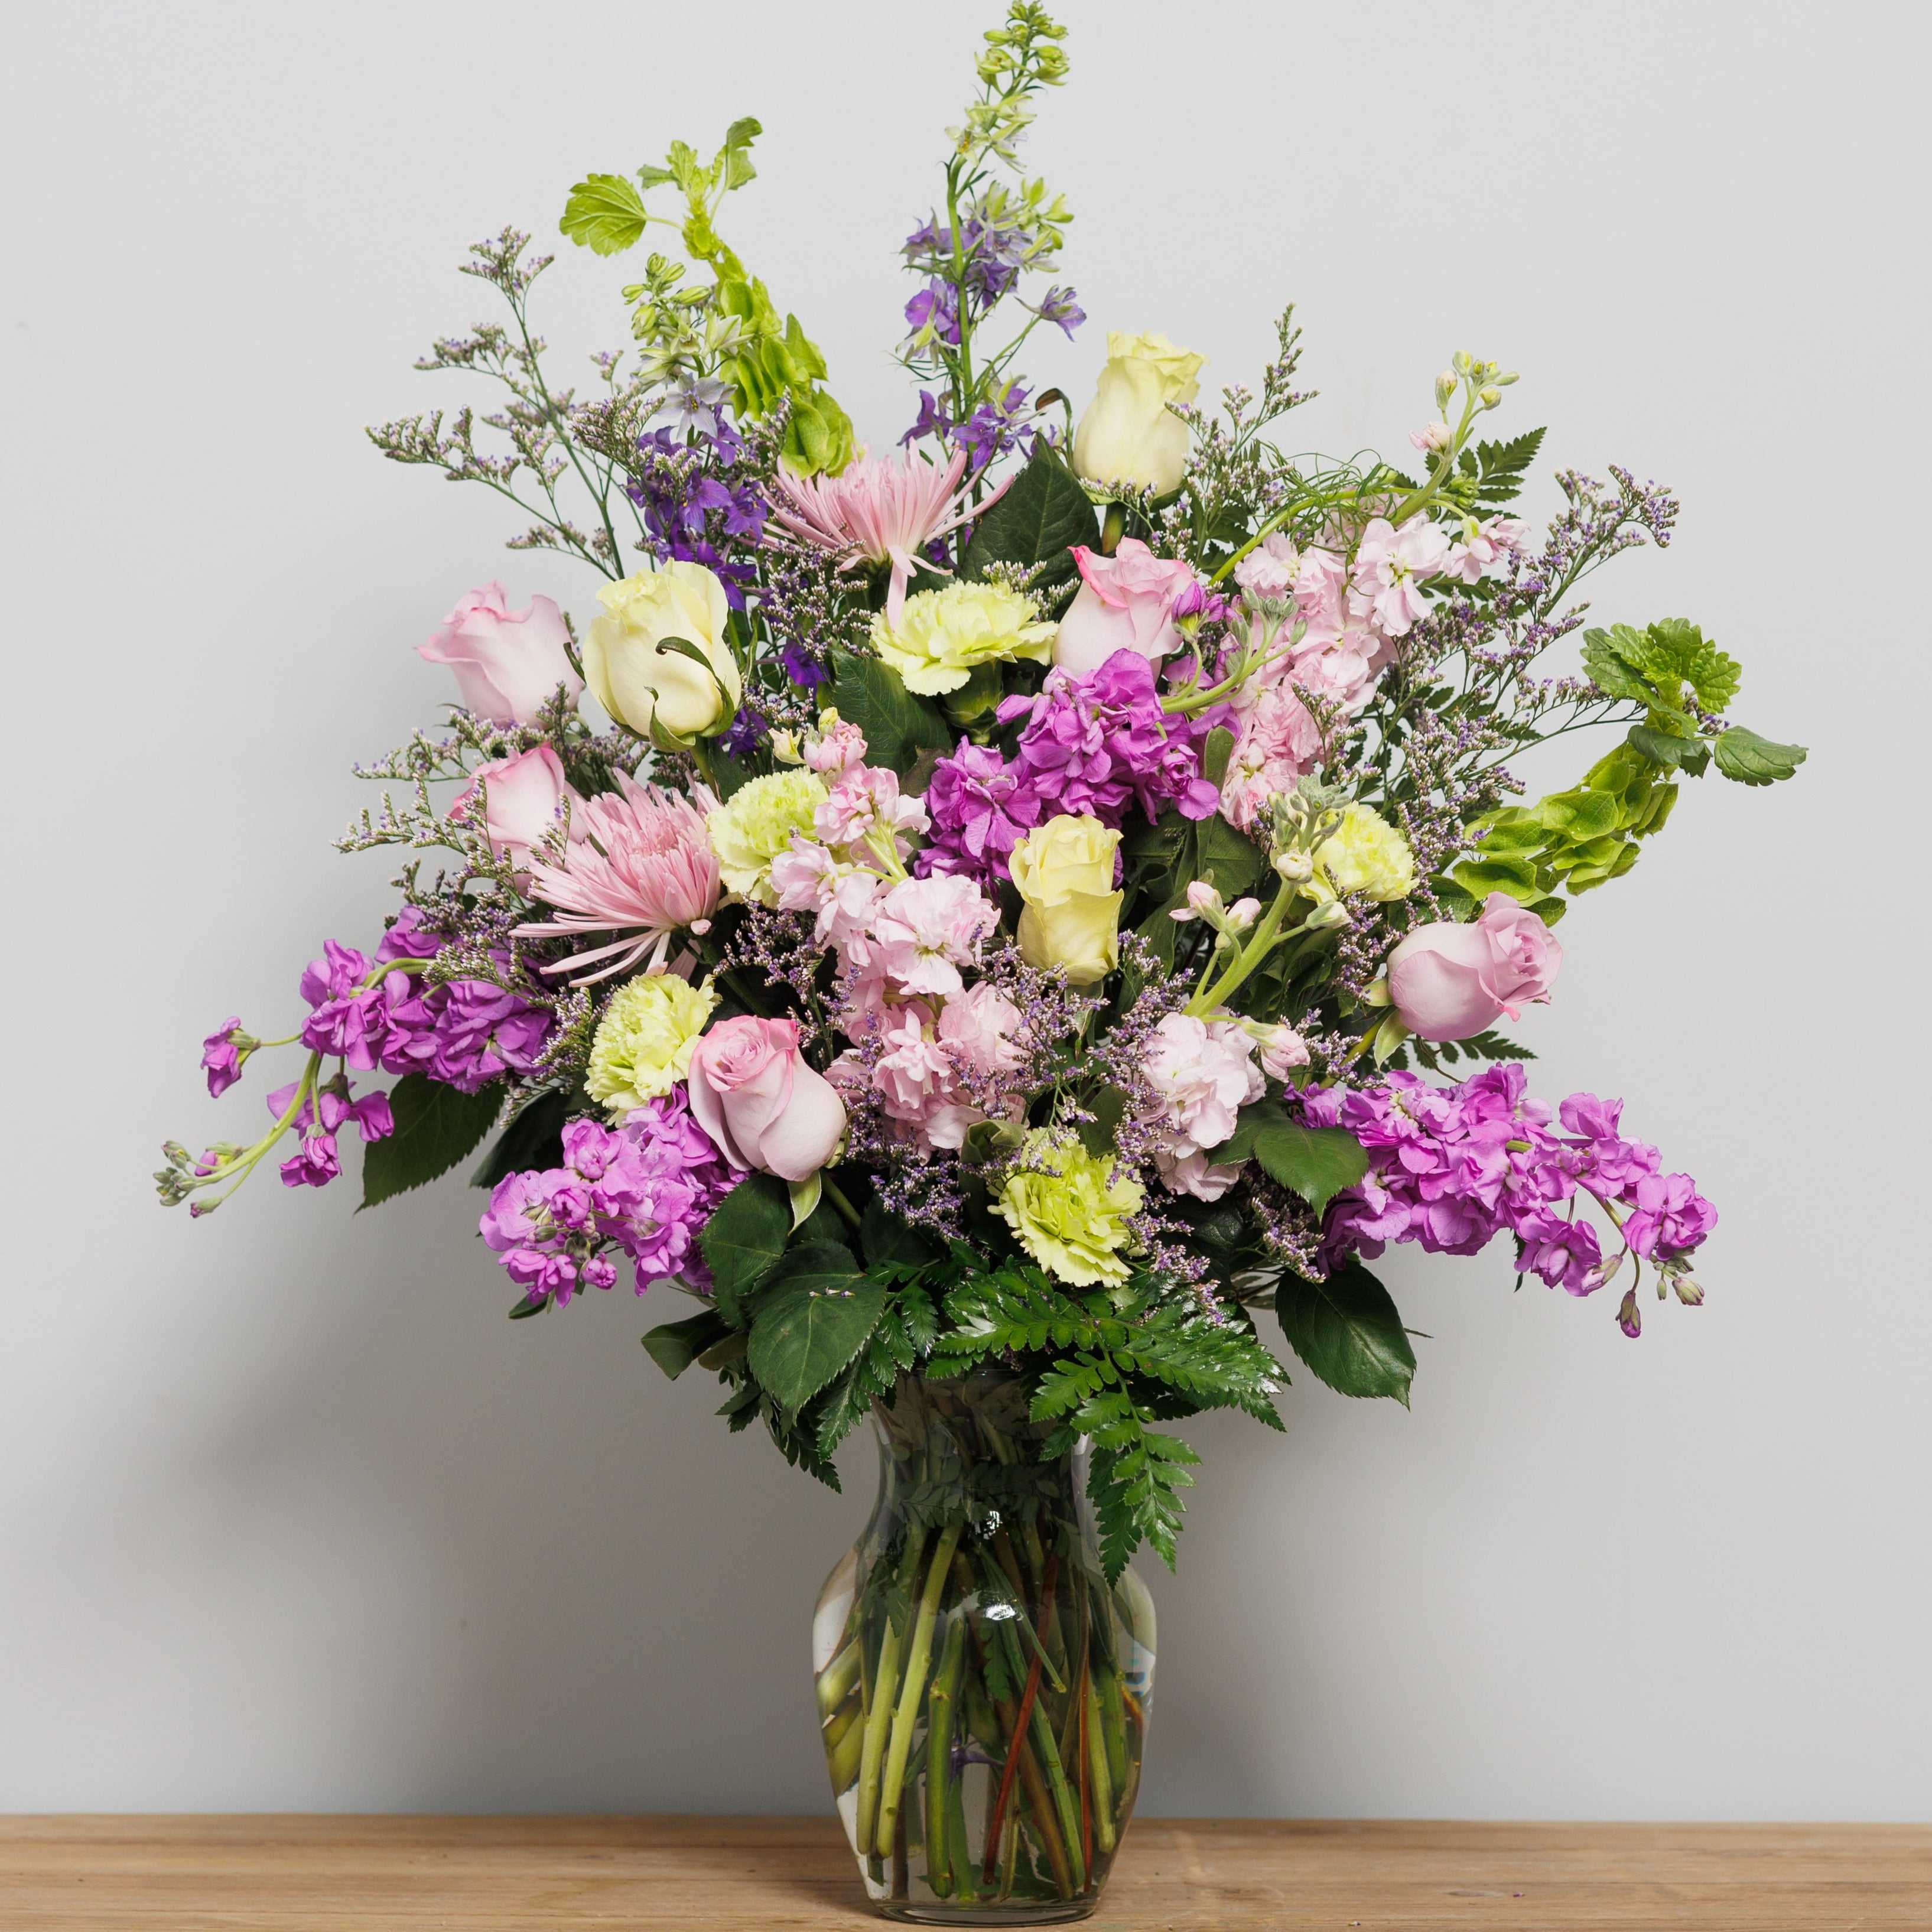 An arrangement with all lavender and lime flowers.